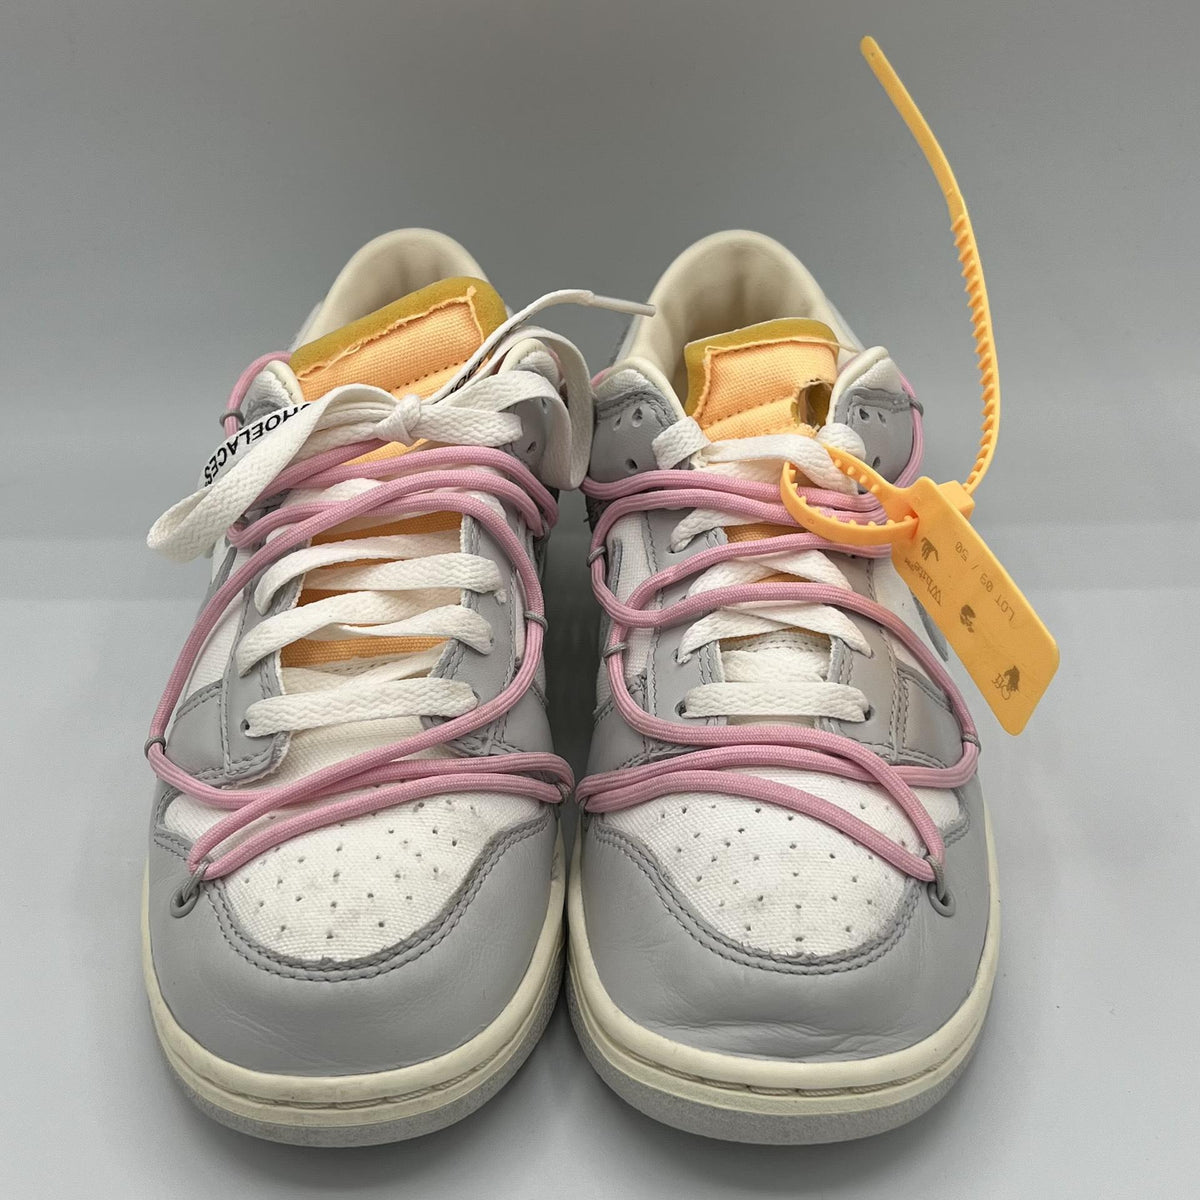 off white x dunk low lot 09 of 50